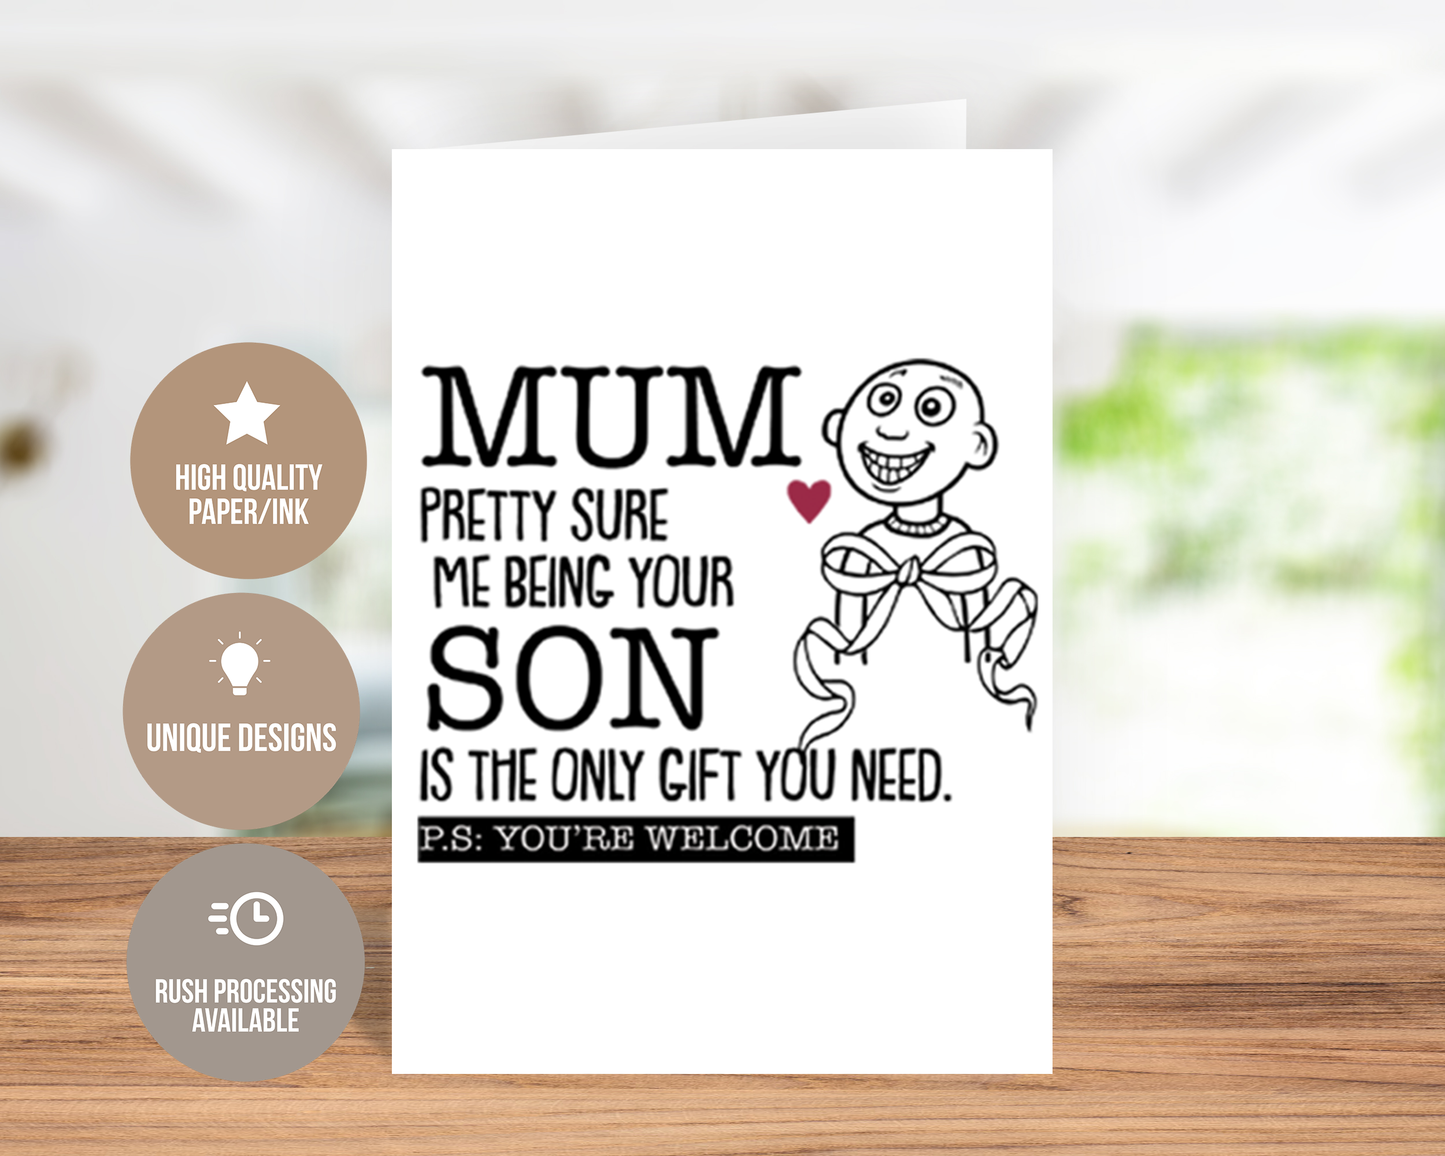 Mum, Pretty Sure Me Being Your Son Is The Only Gift You Need Funny Card